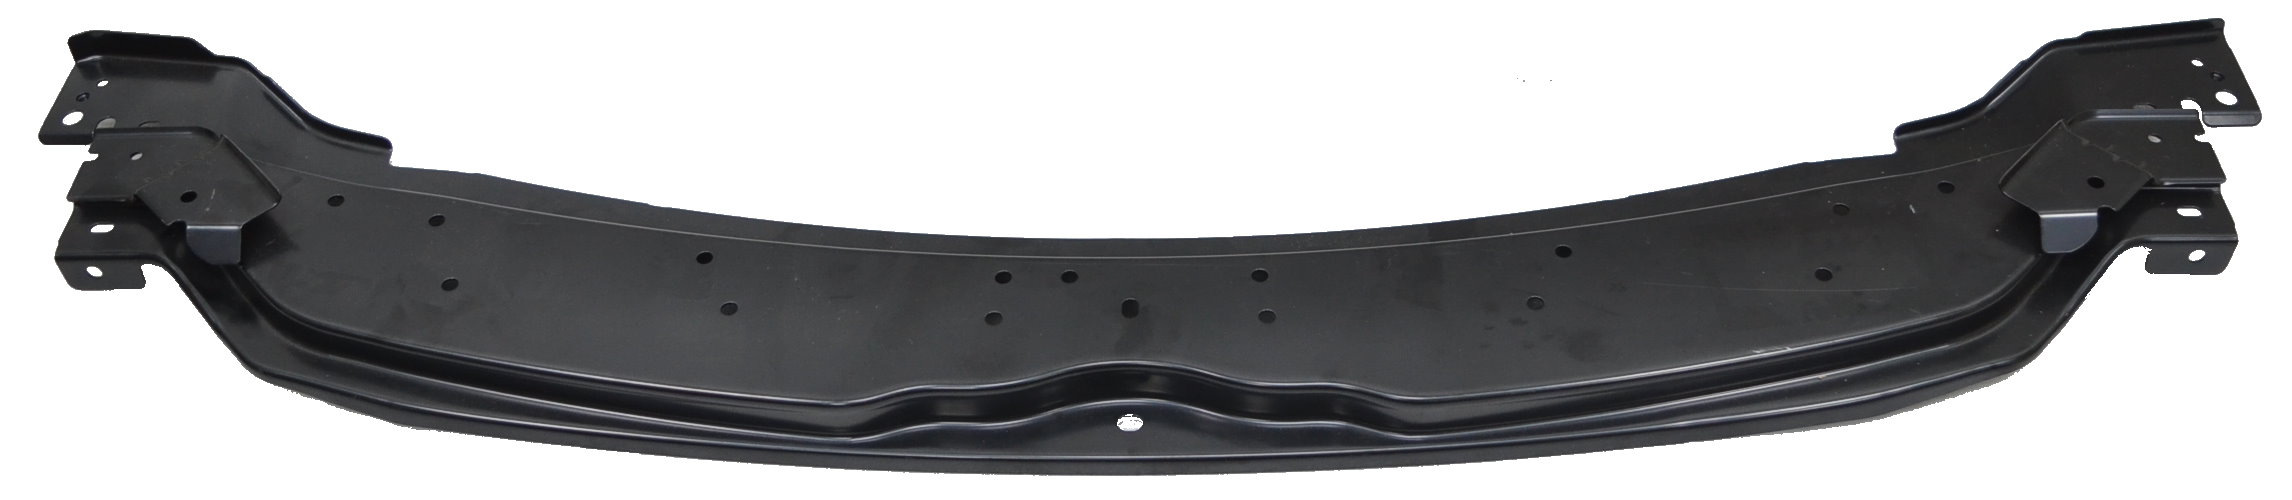 Aftermarket BUMPER COVERS for NISSAN - ARMADA, ARMADA,17-20,Front bumper cover retainer upper